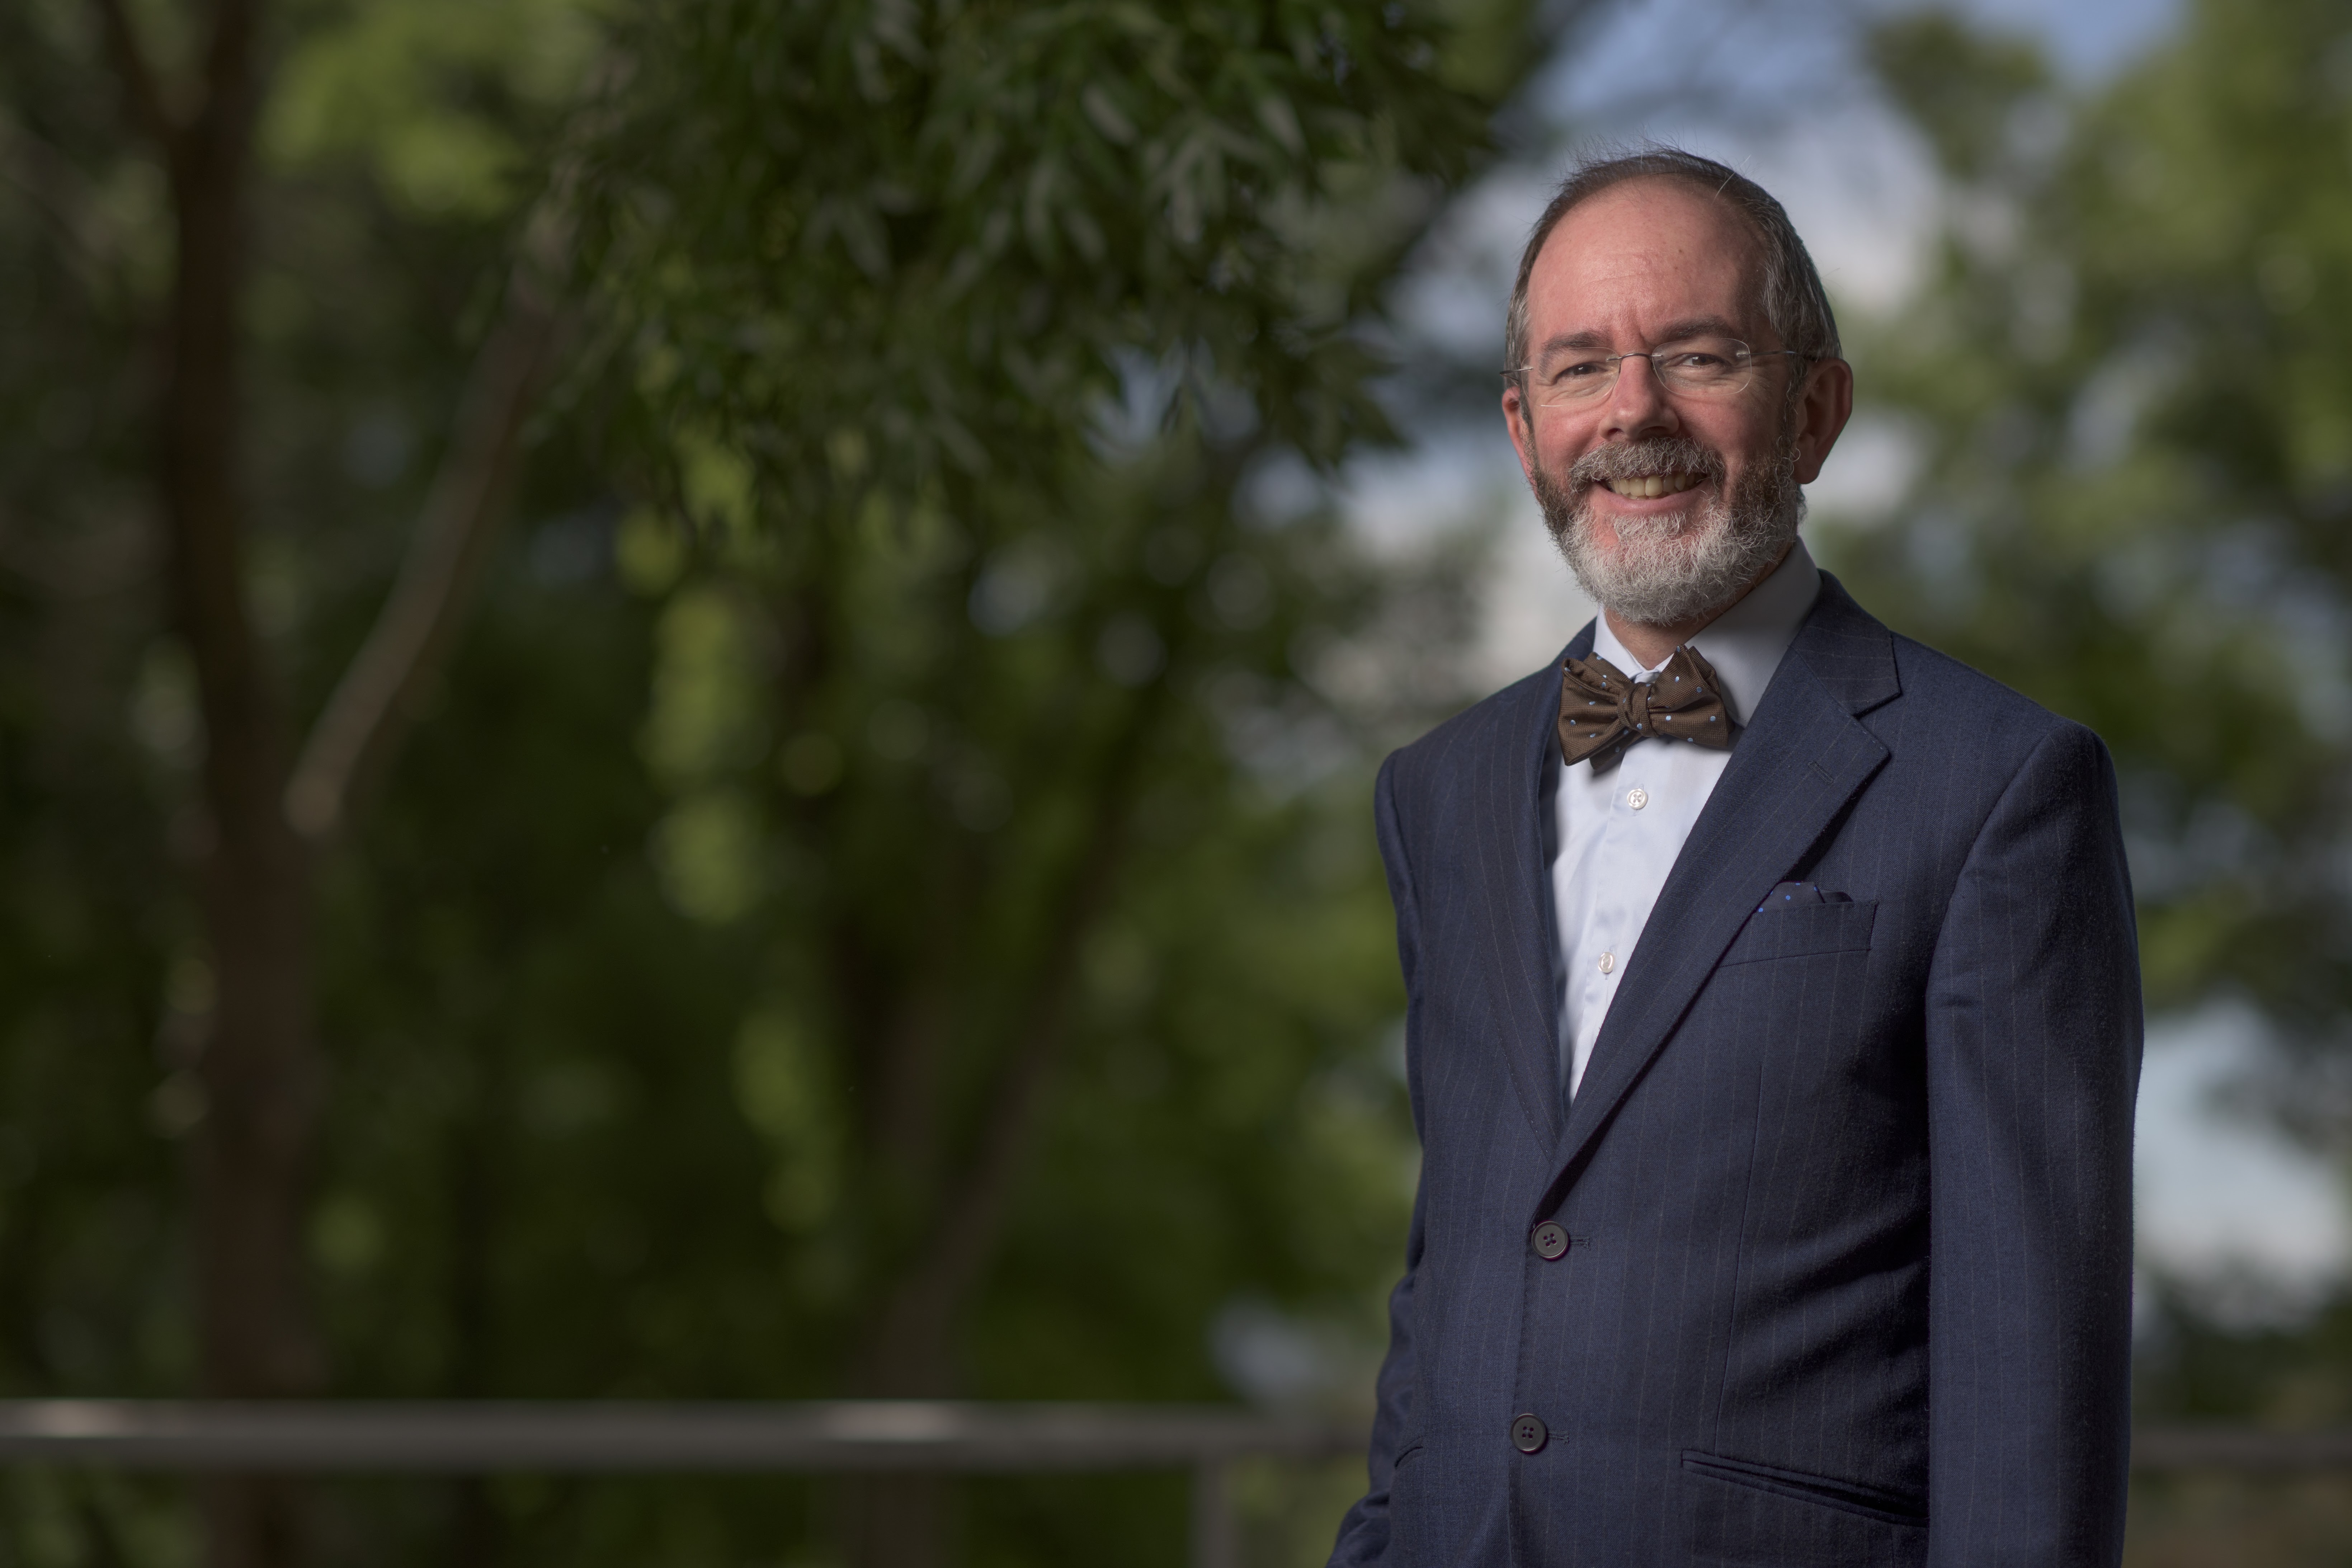 A/Prof. Douglas Guilfoyle is standing outside in front of greenery, wearing a suit and bow tie. He is smiling.